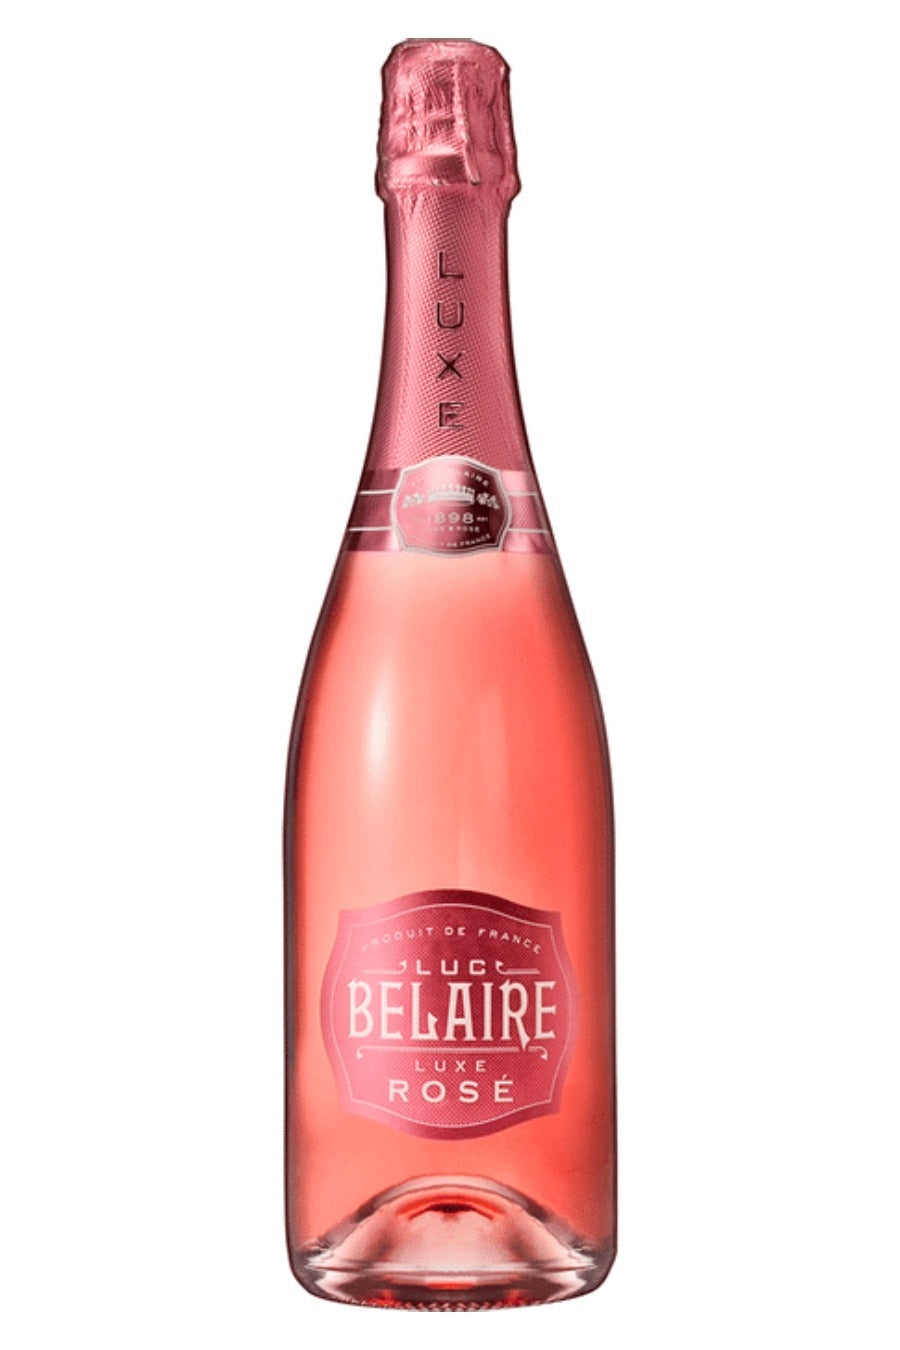 Belair Rare Luxe Champagne 750ml